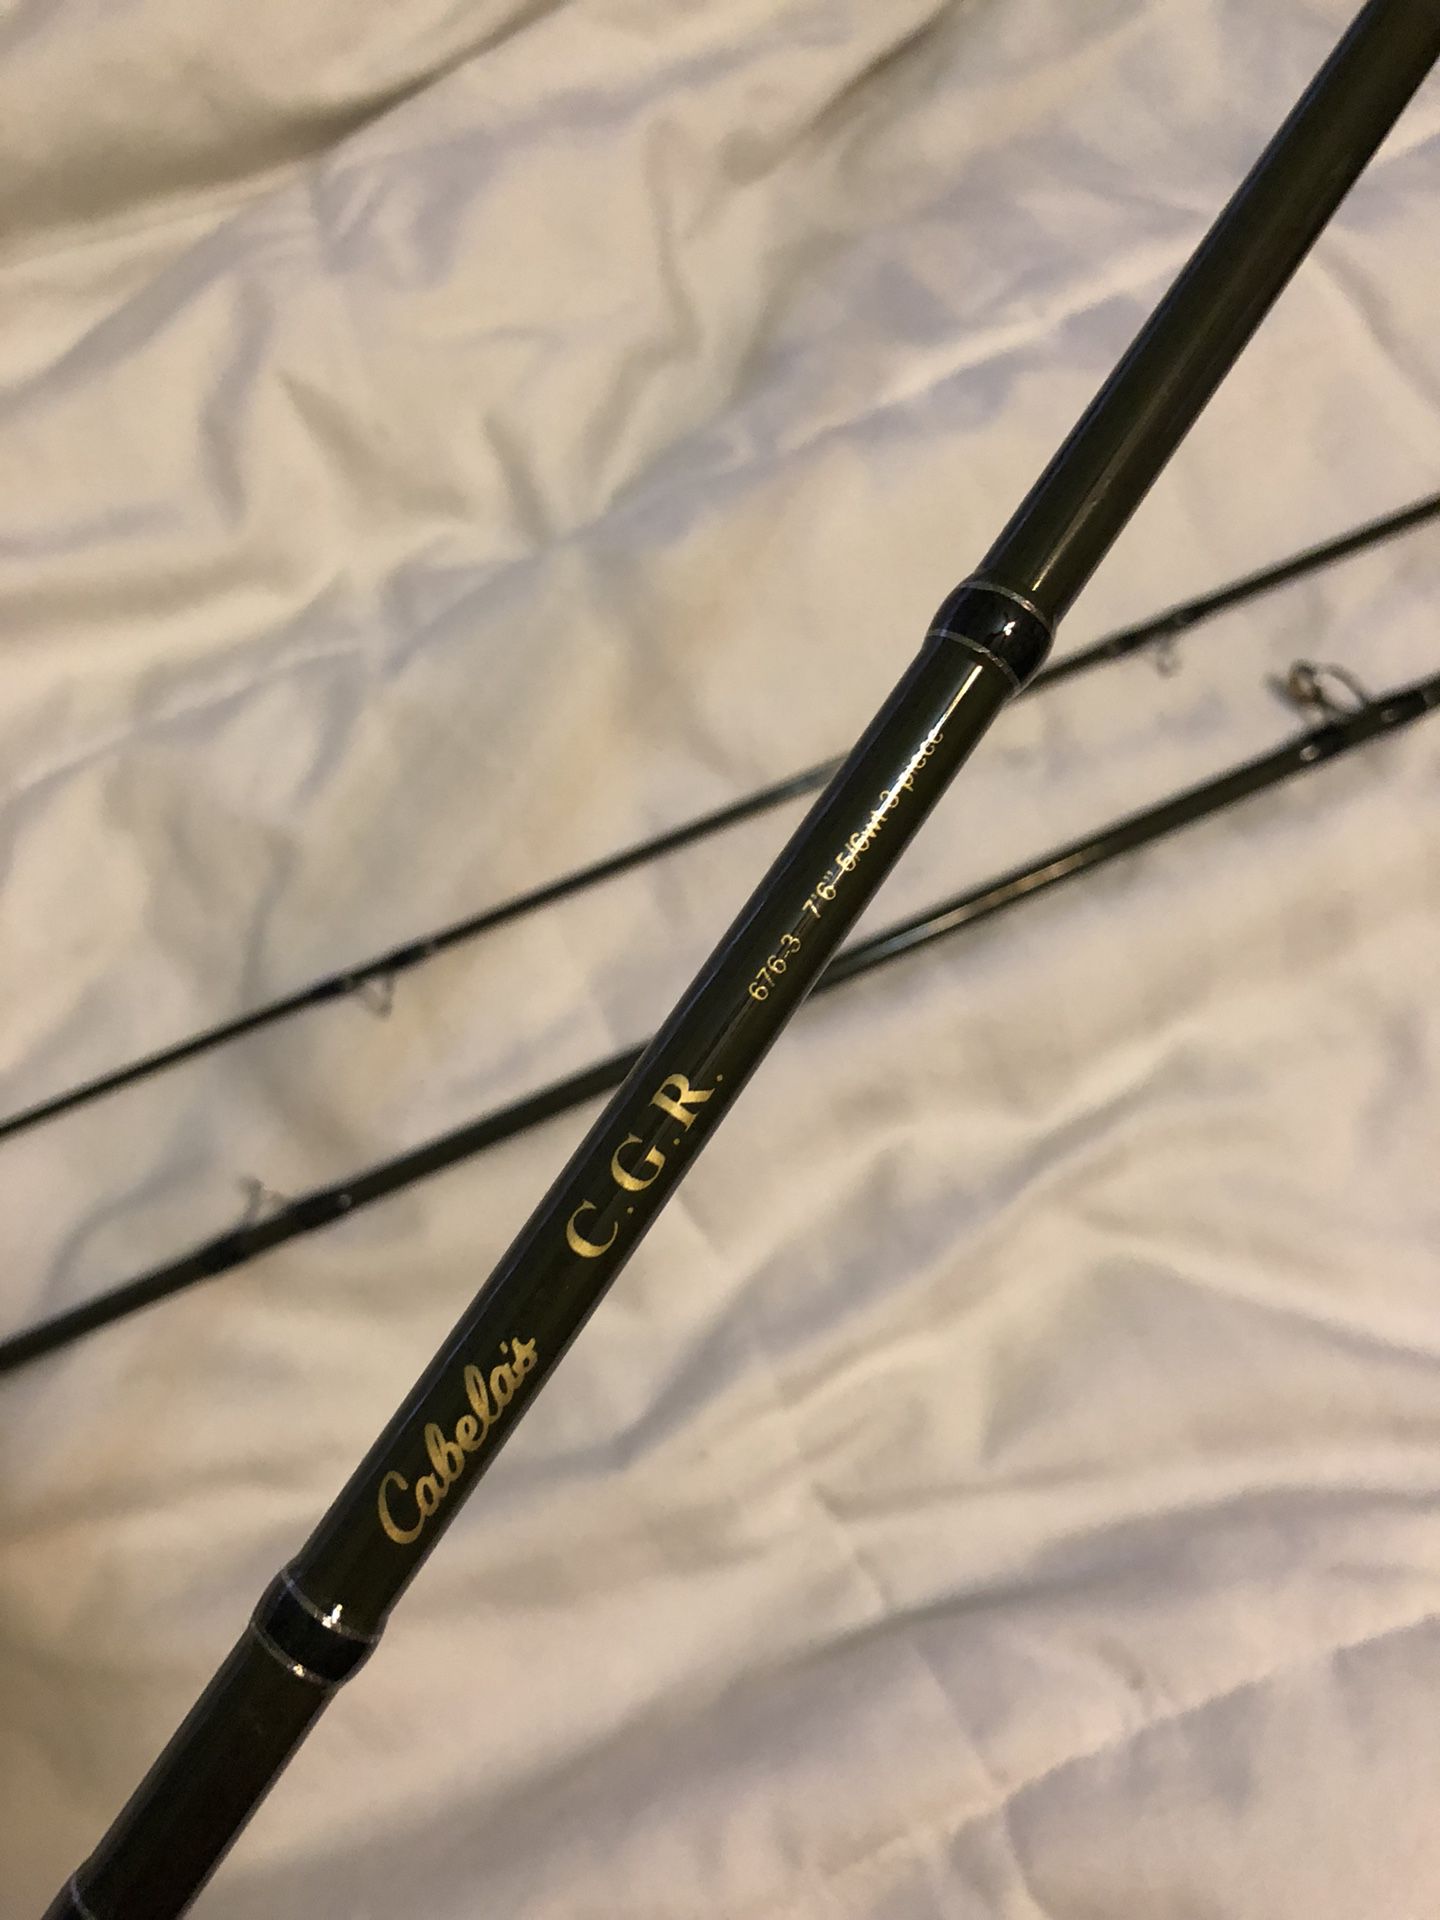 Cabelas CGR Fly Rod 7'6” 5/6wt for Sale in Coral Gables, FL - OfferUp